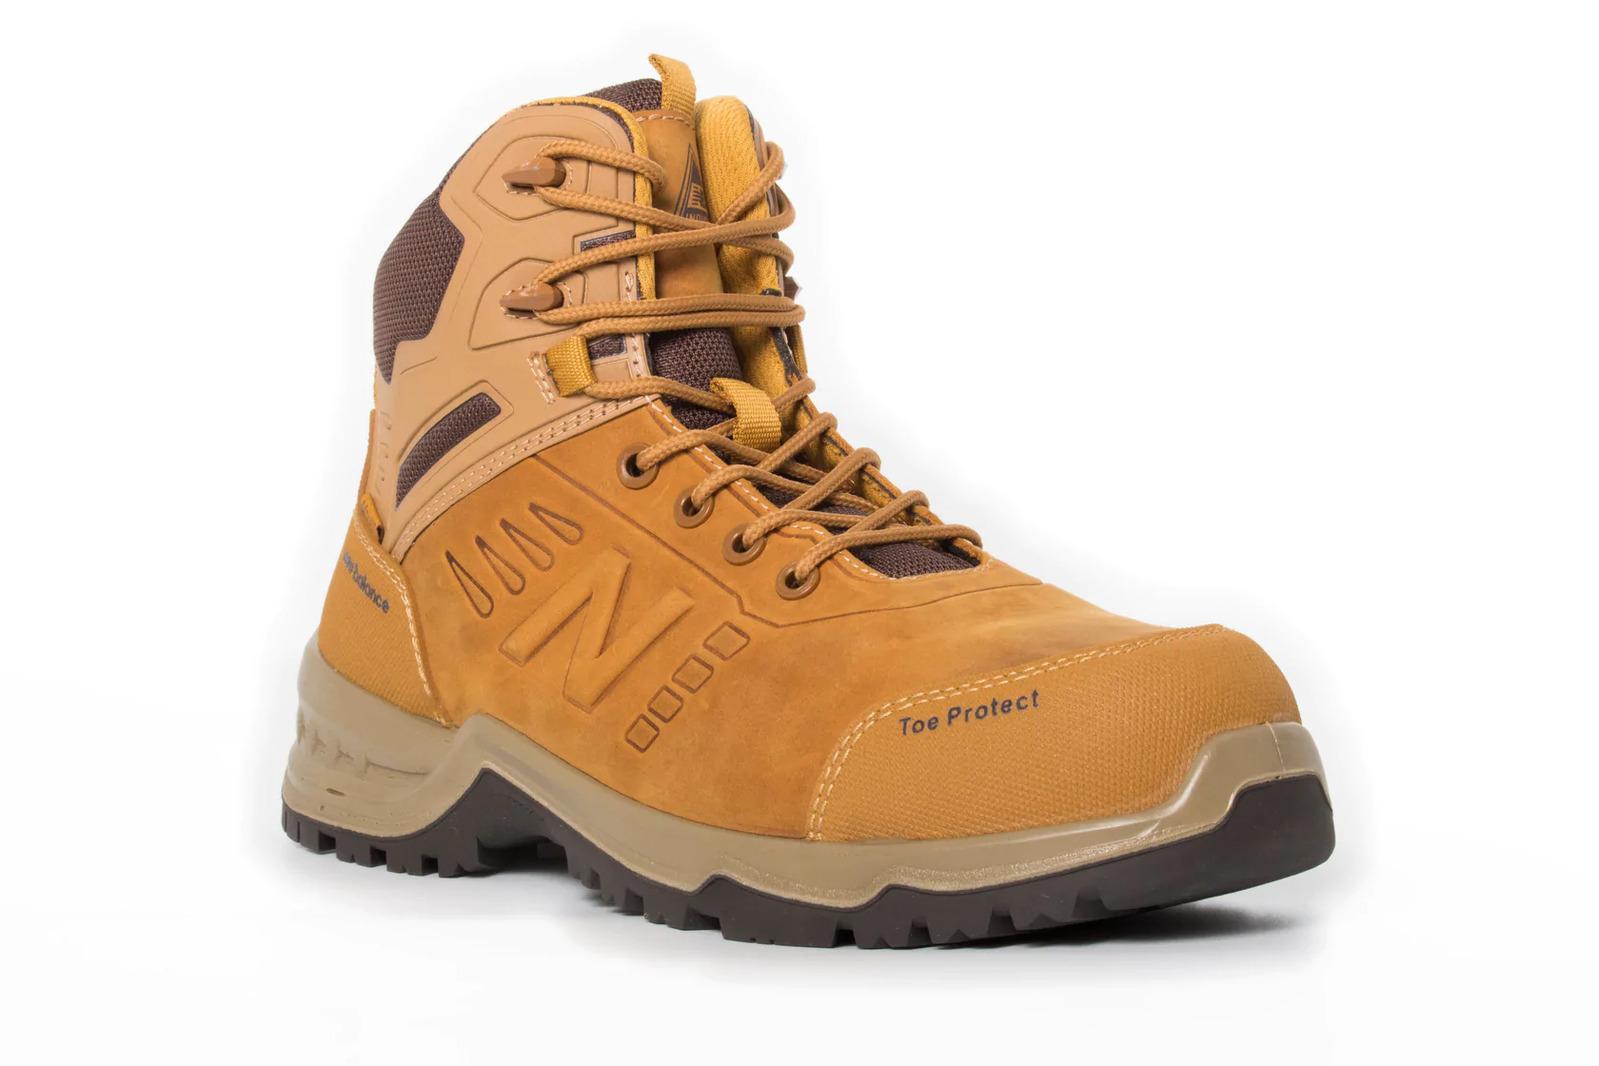 New Balance Mens Contour Steel Toe Cap Safety Work Boots with Zip - Wheat - US 13 Width:4E